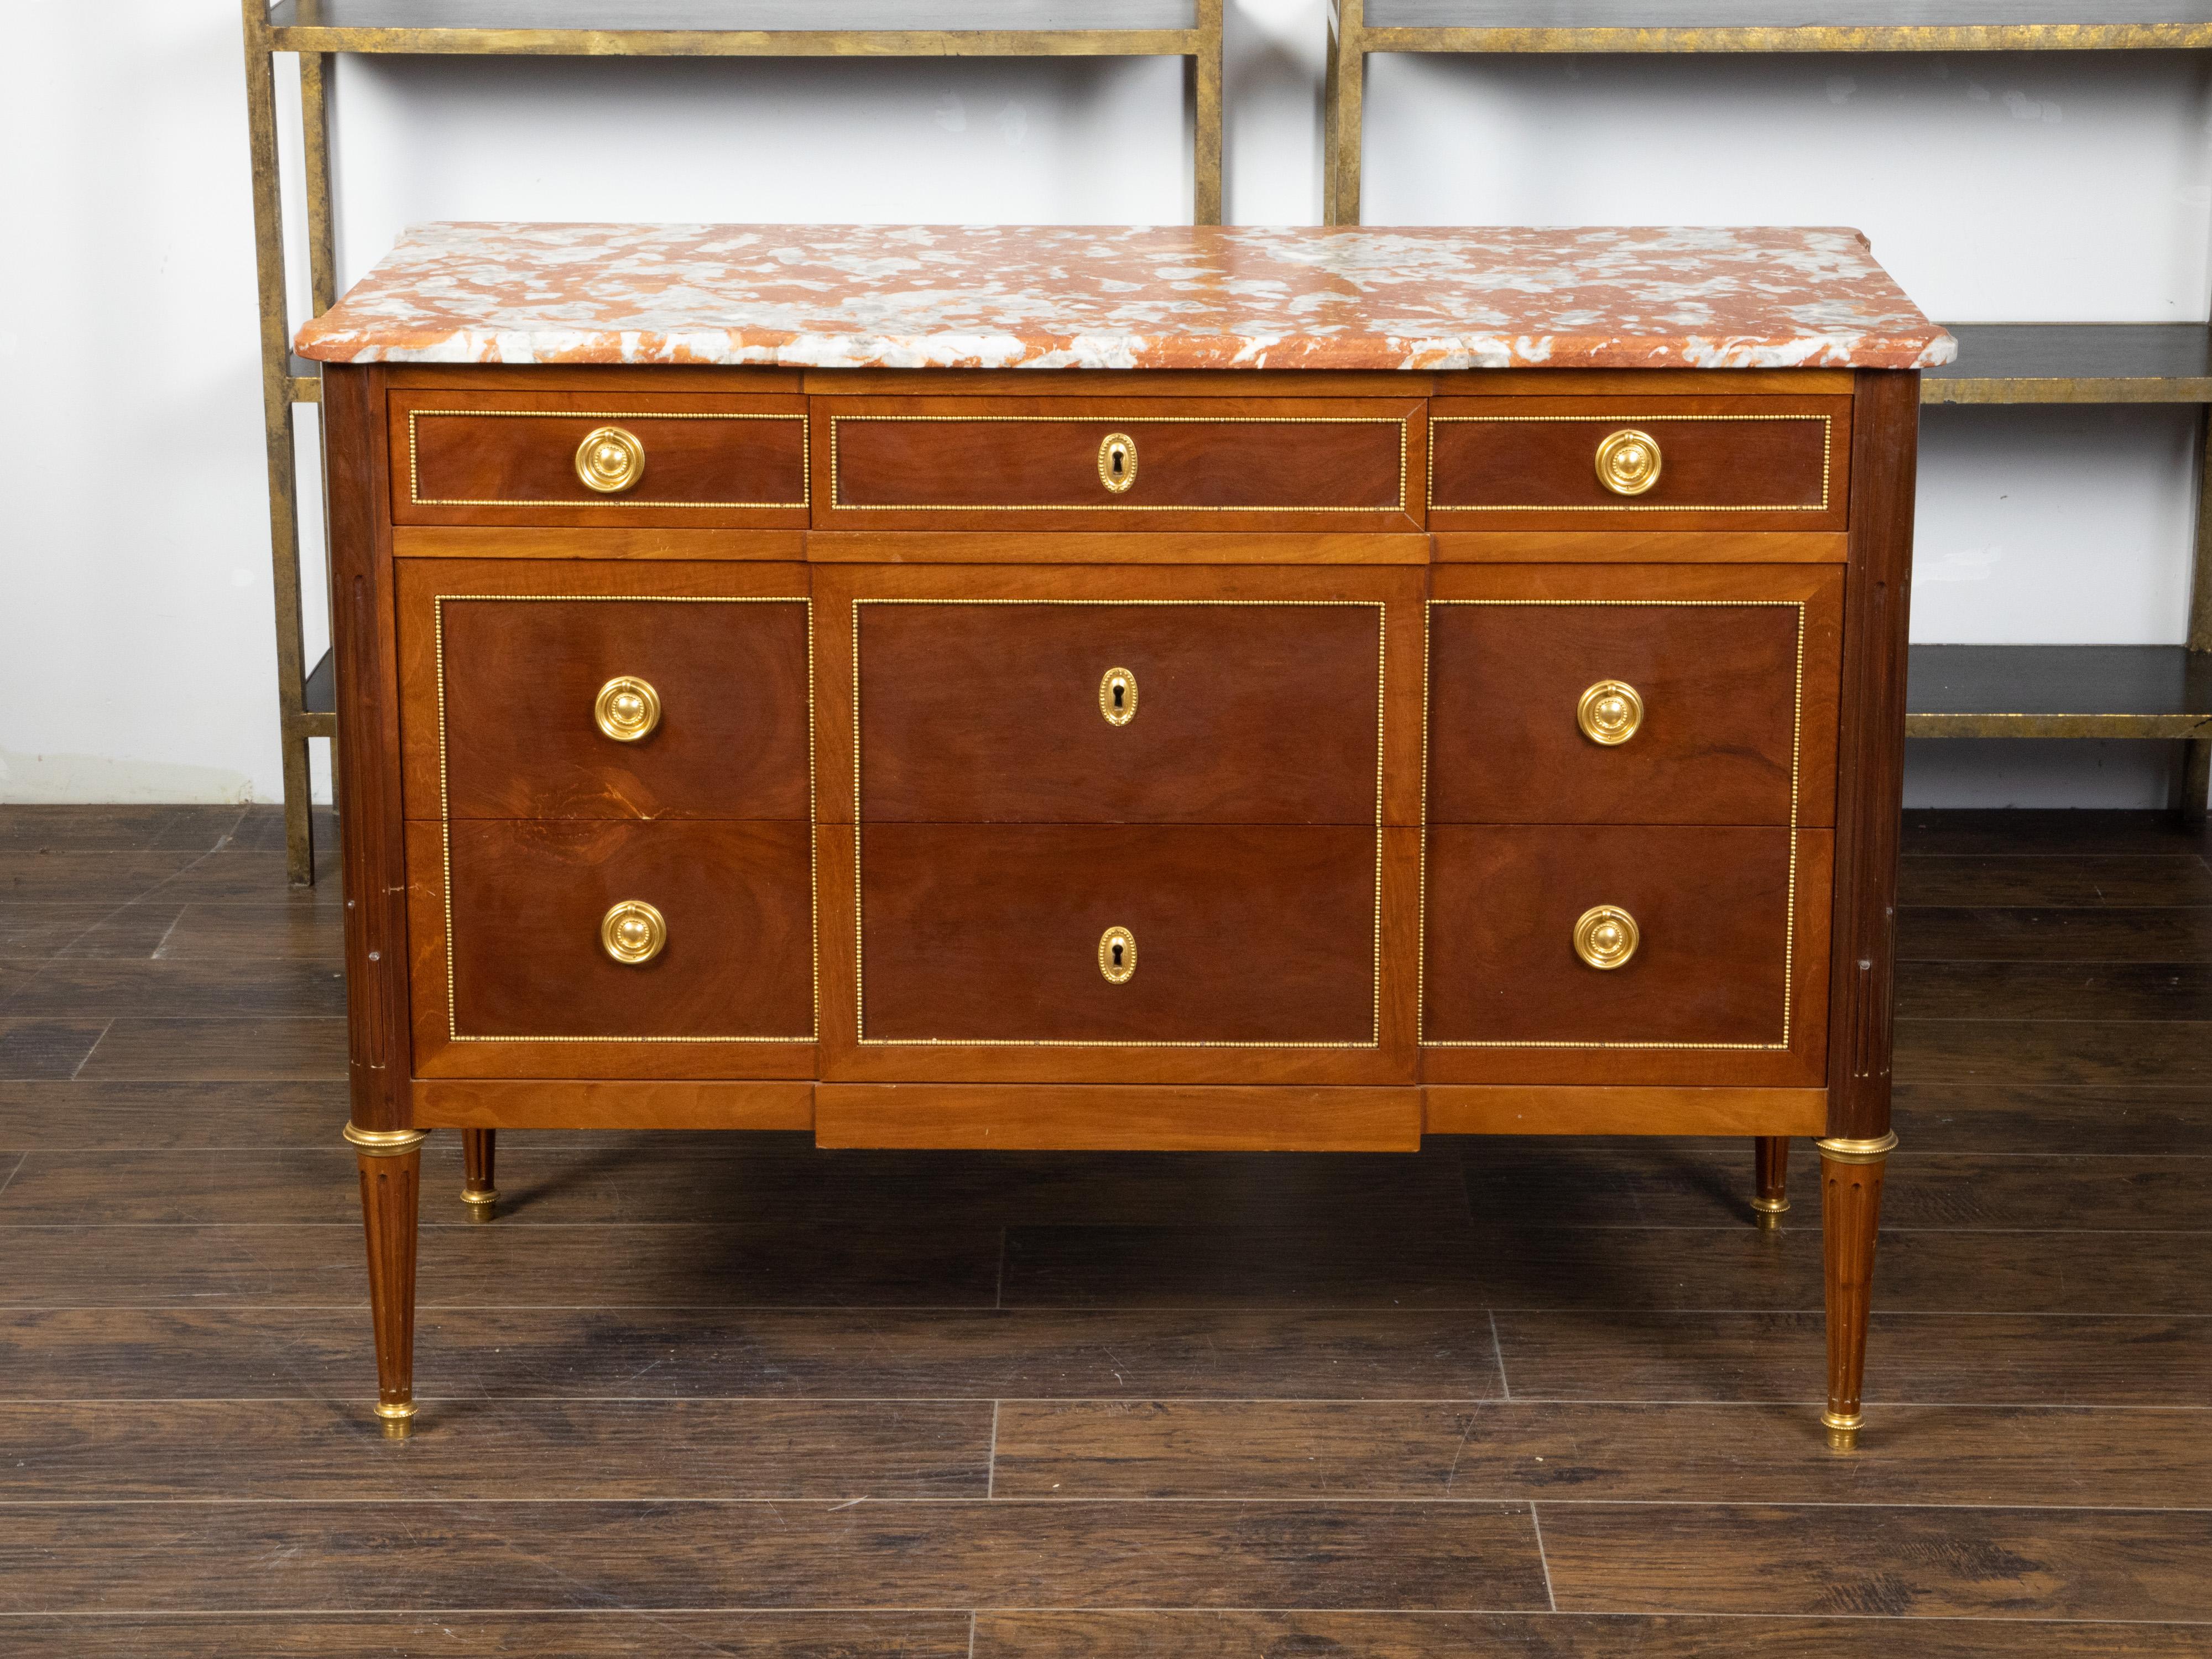 A French Louis XVI style walnut commode from the 19th century, with red marble top, gilt bronze accents and drawers. Created in France during the 19th century, this walnut commode features a rectangular red marble top with rounded corners, sitting